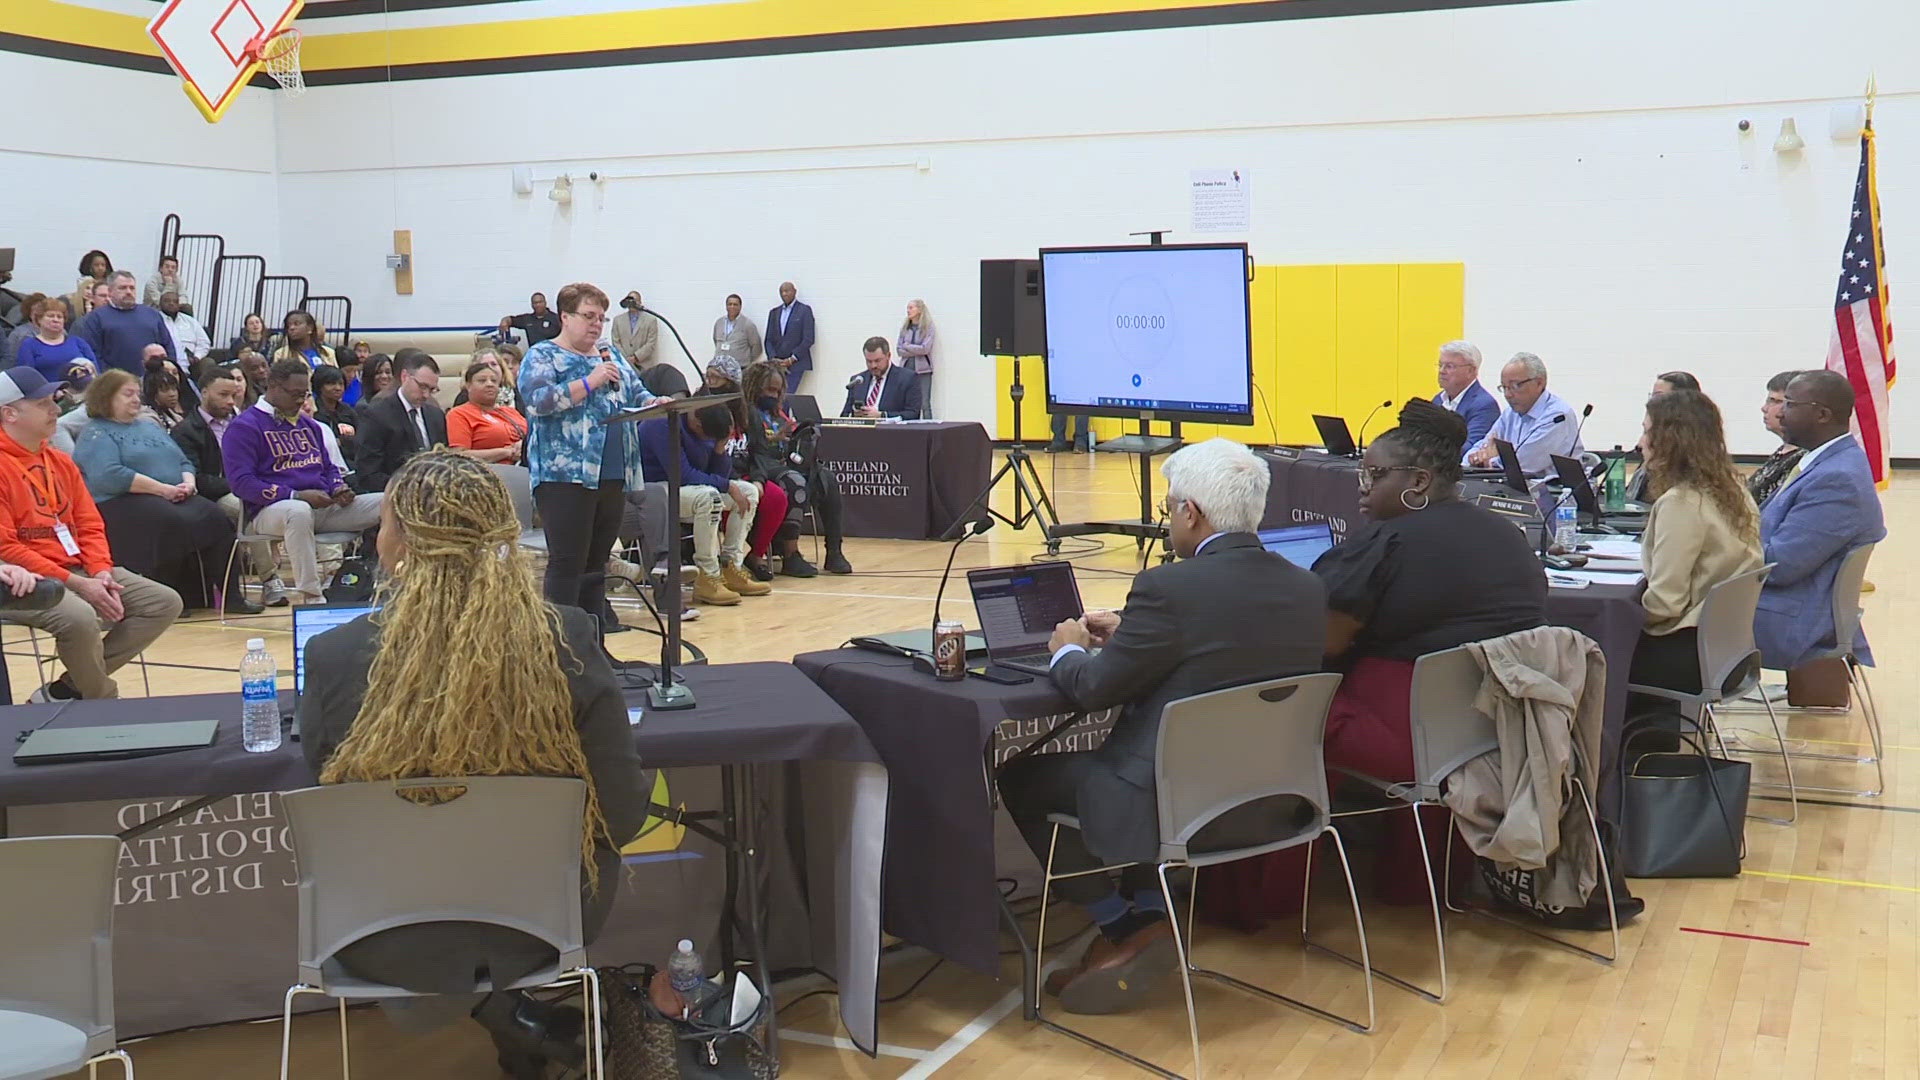 According to union leadership, more than 70% of members voted in favor of the new agreement. CMSD's Board of Education approved the deal earlier this week.